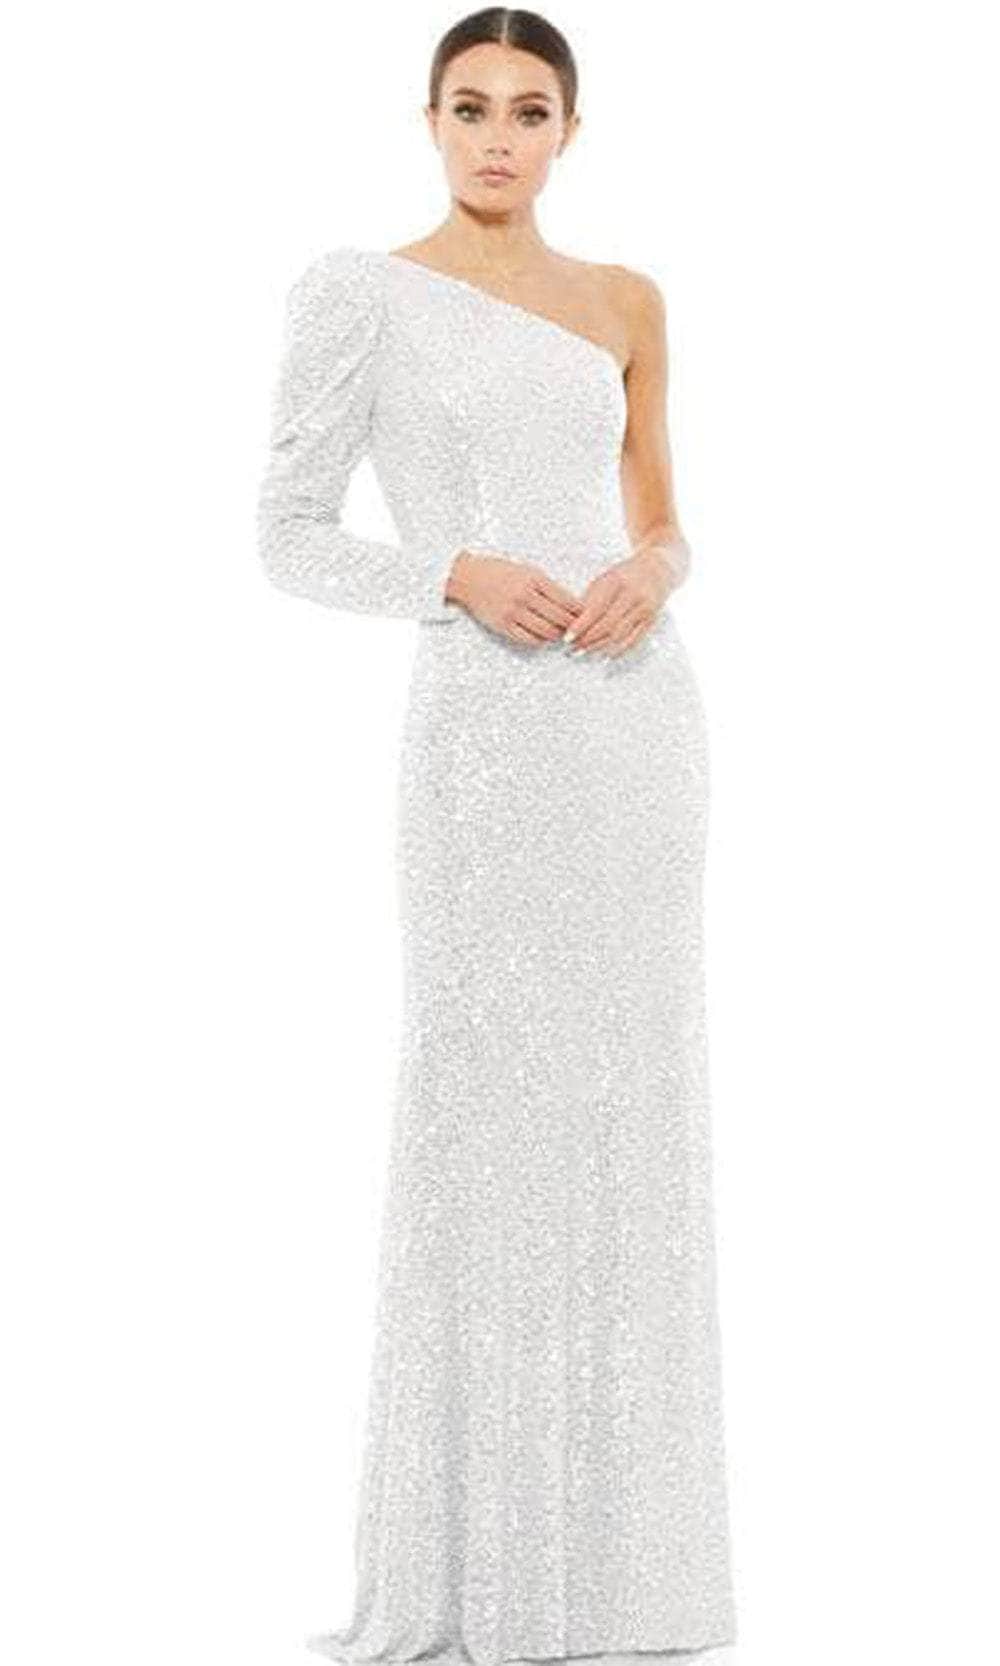 Ieena Duggal 26591 - One Shoulder Sequined Sheath Gown Special Occasion Dress 0 / White